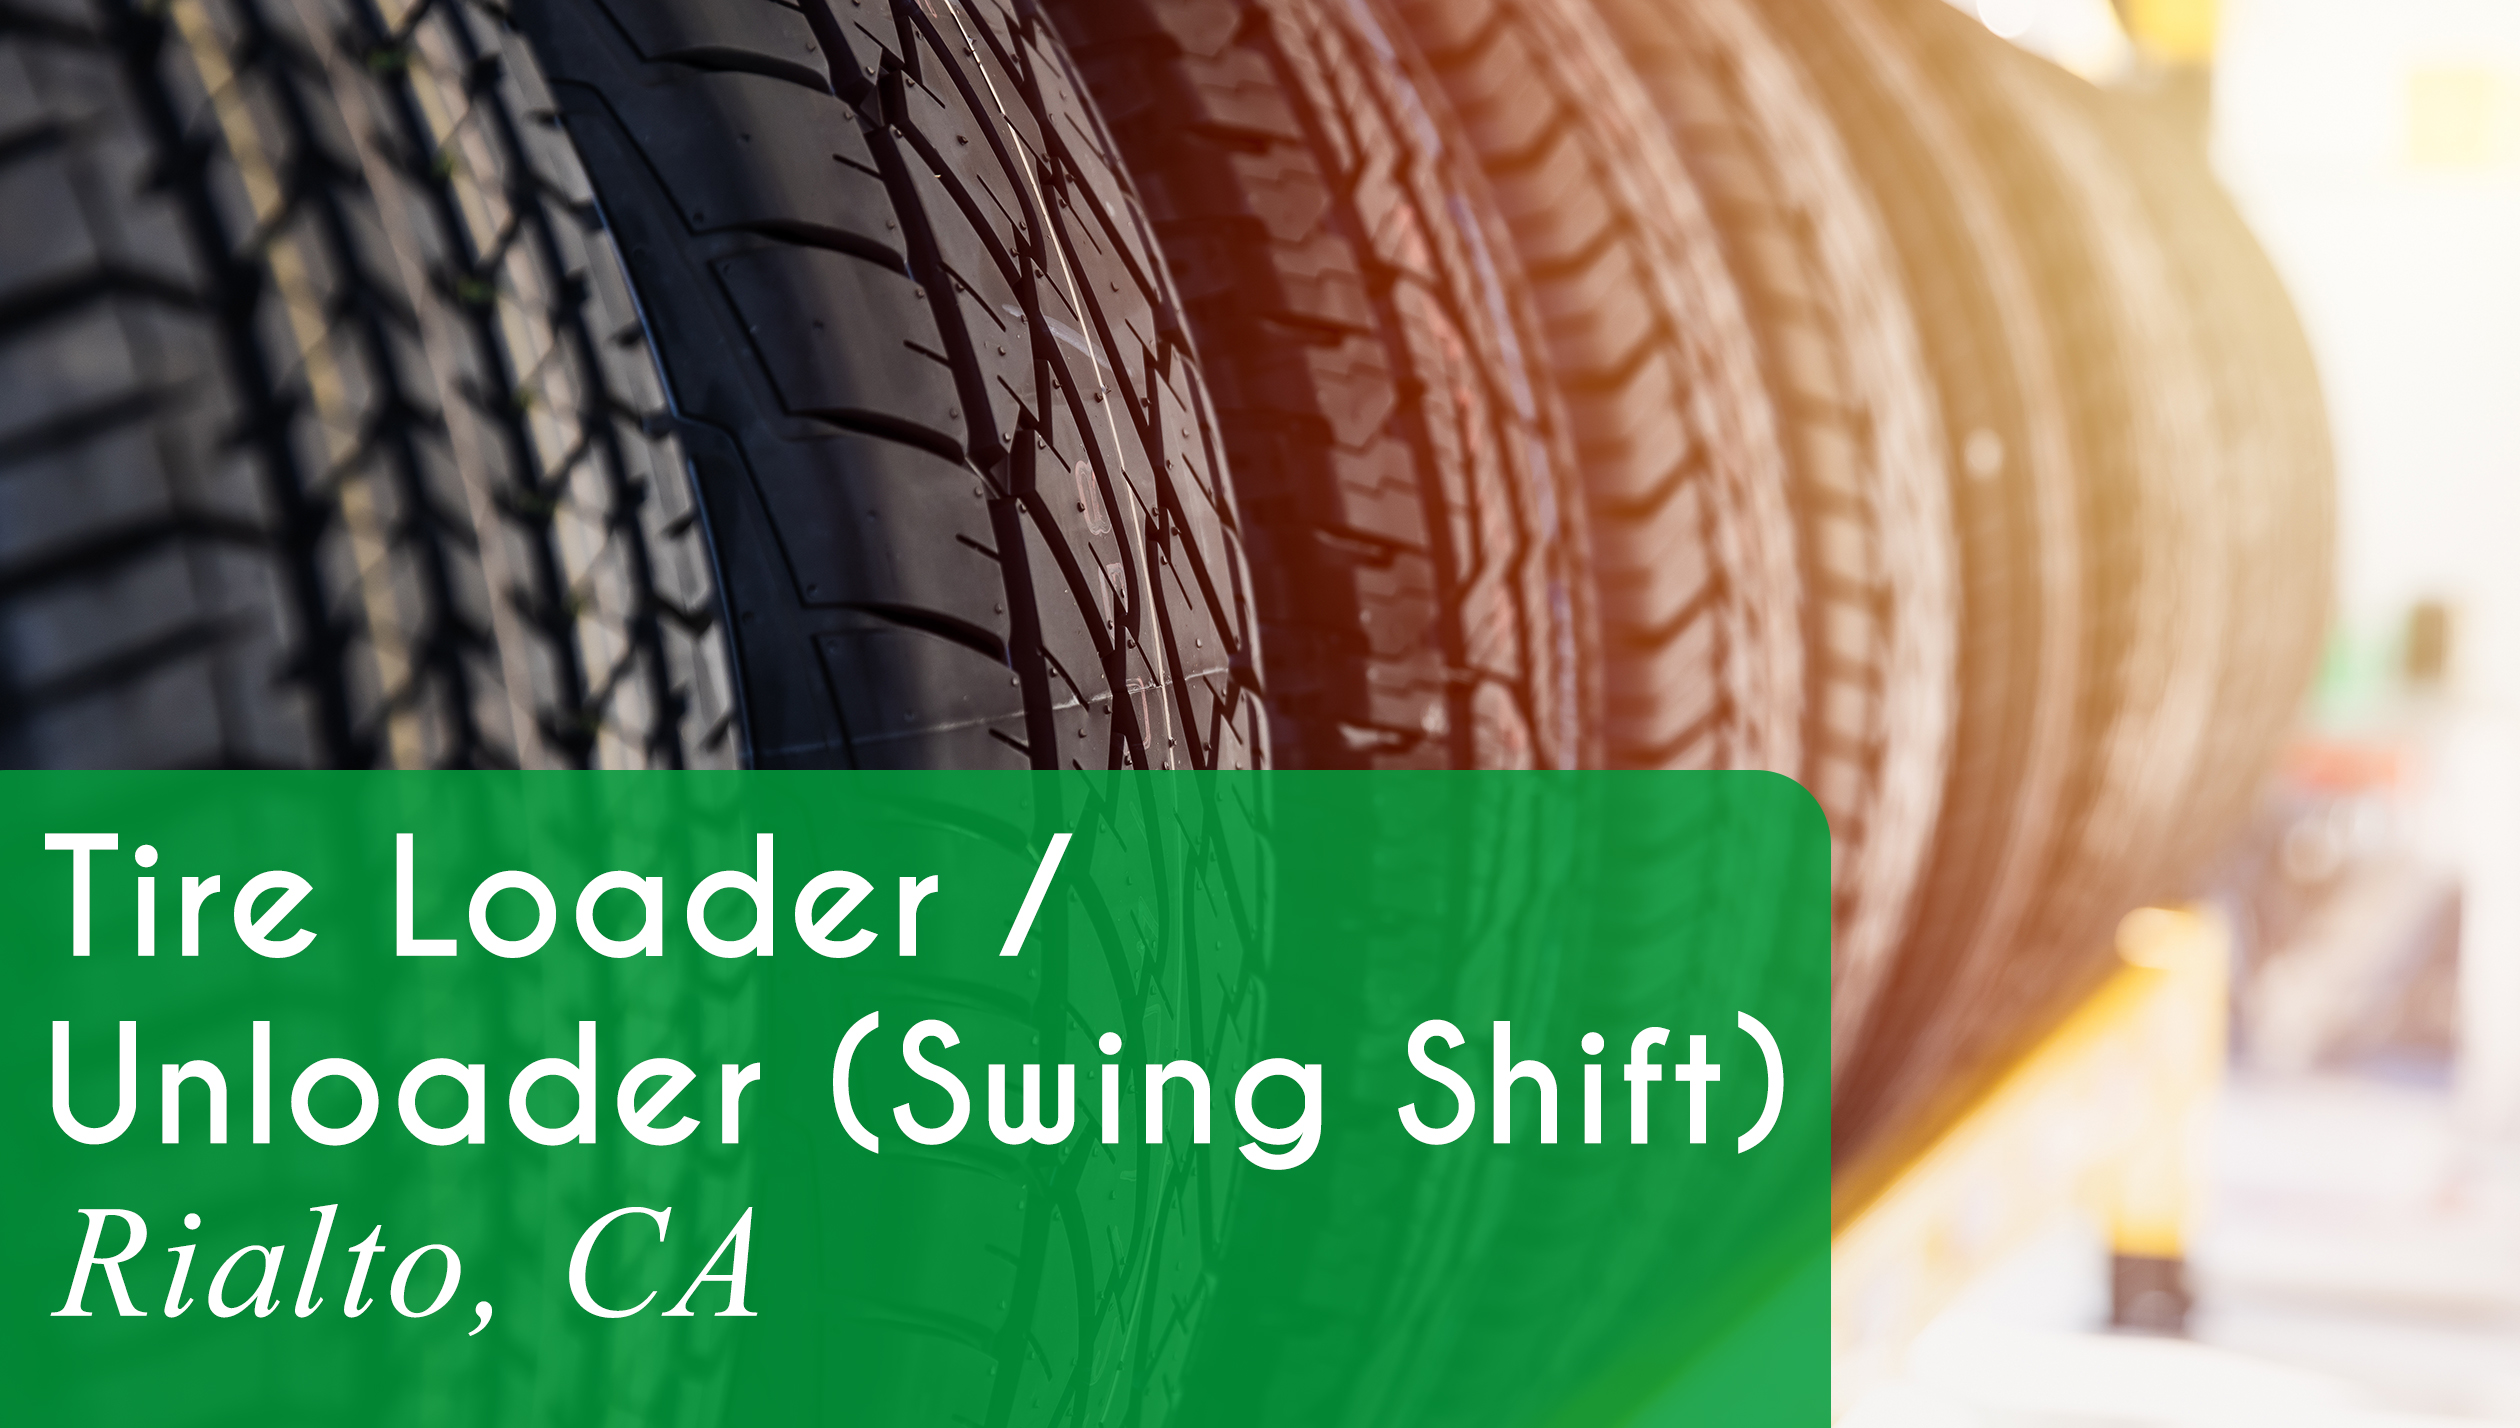 Now Hiring a Tire Loader / Unloader for the Swing Shift in Rialto, CA